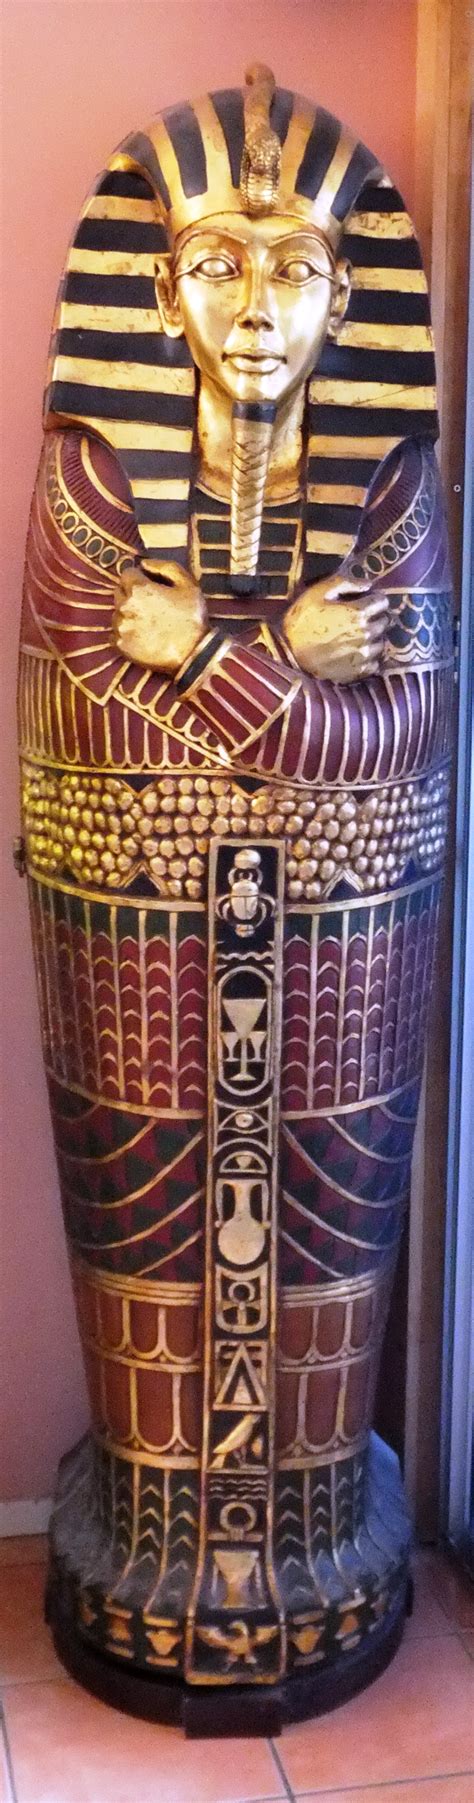 sarcophagus eclectic home decor home furnishings